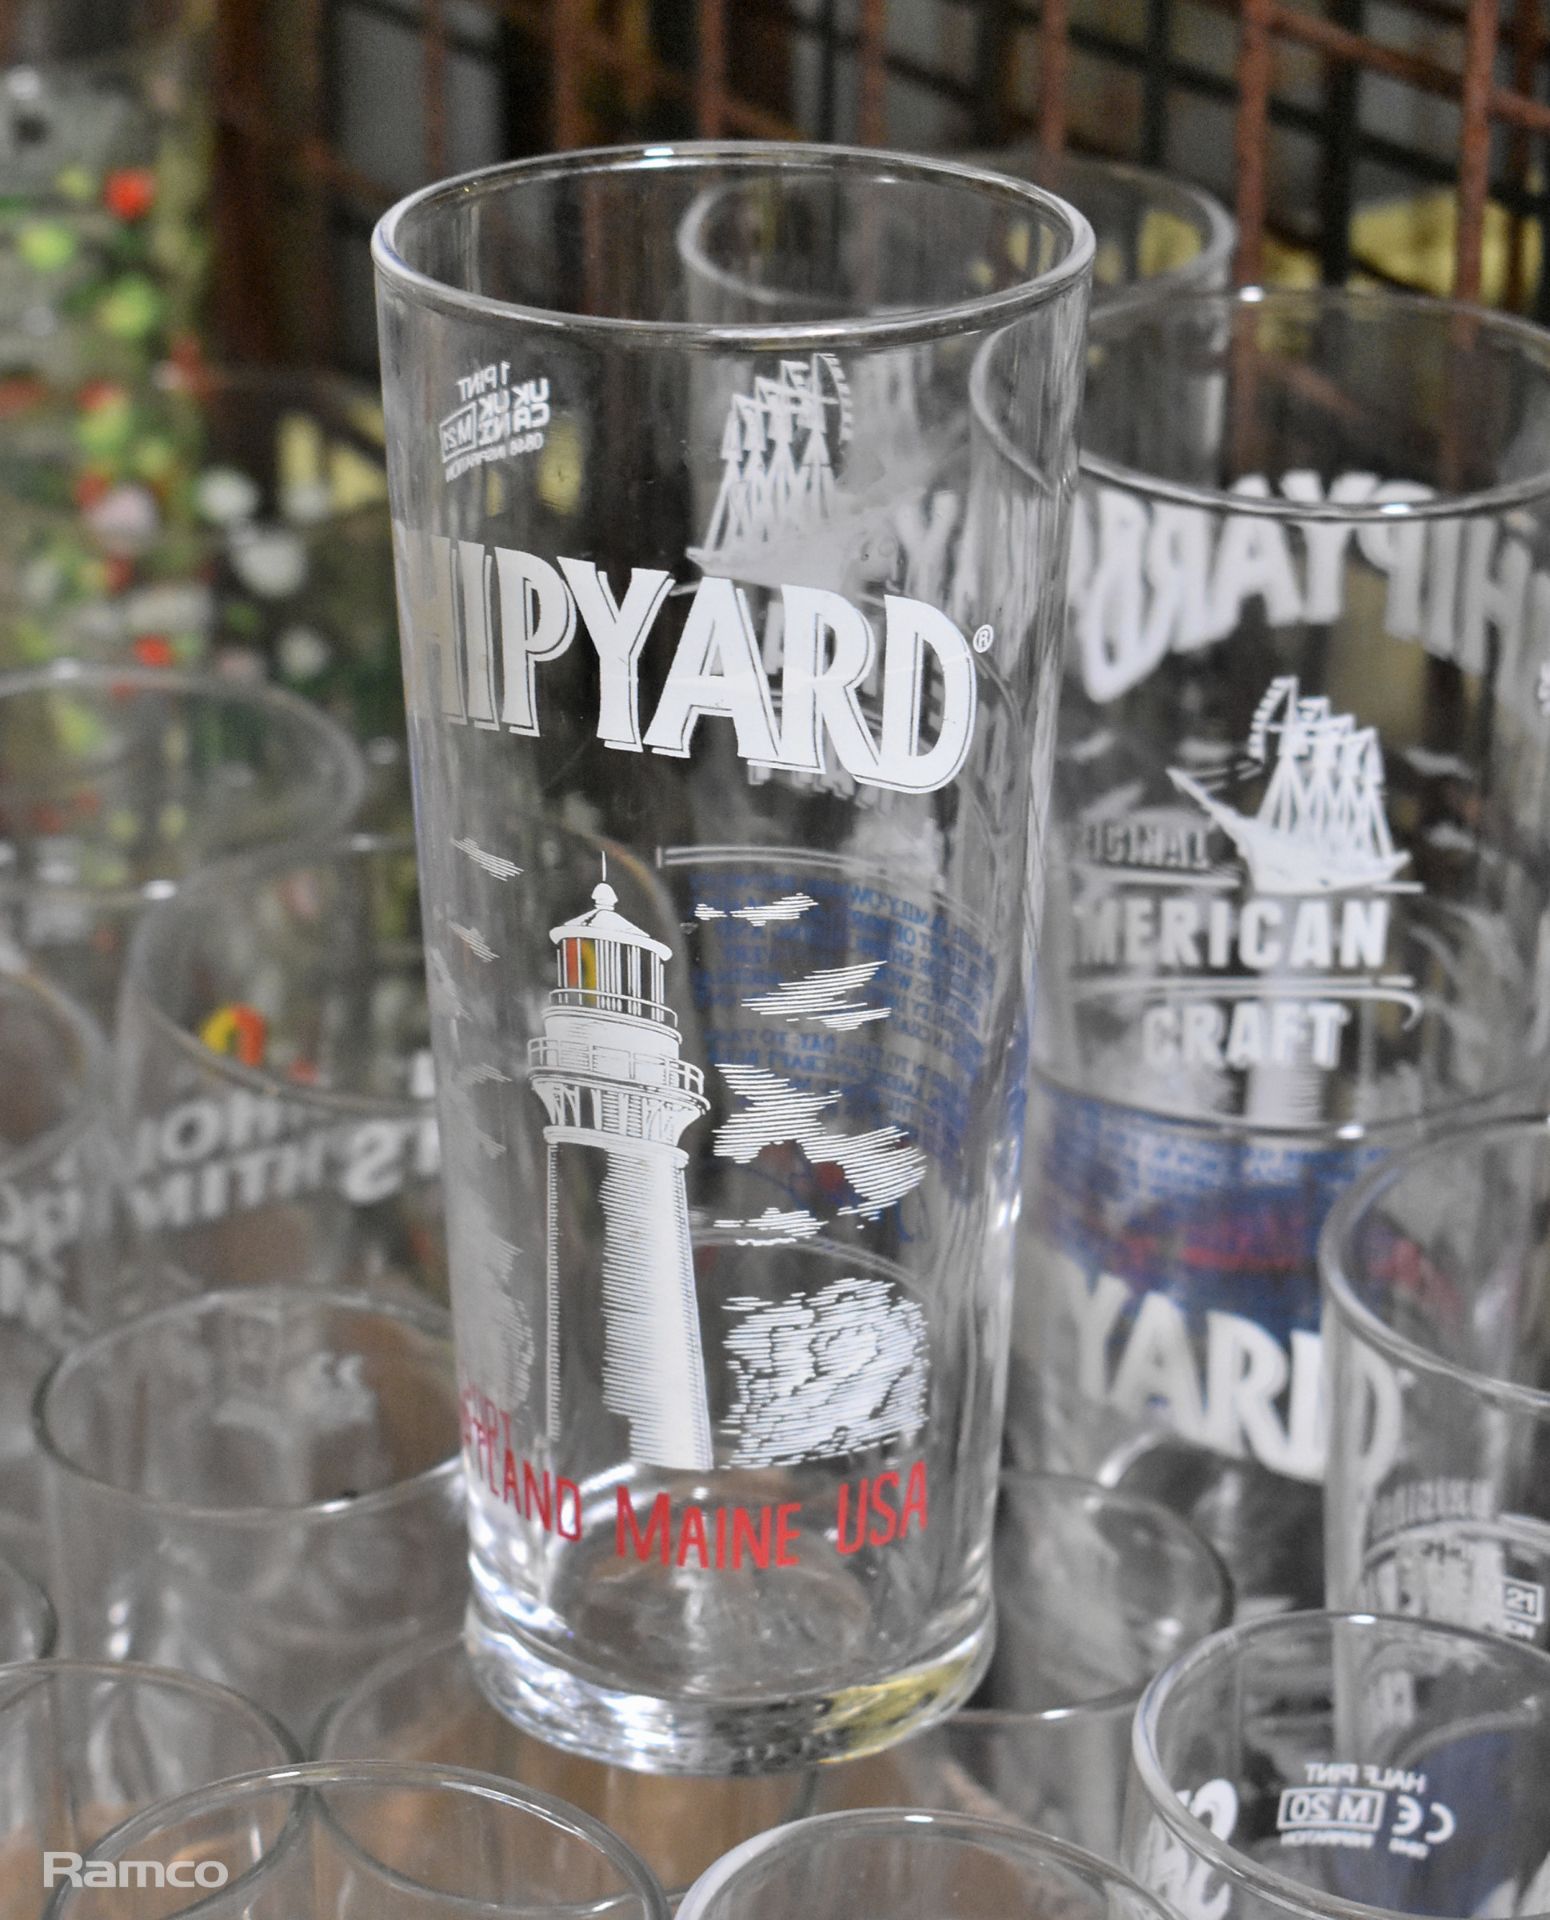 Drink glasses of various sizes - Image 8 of 8